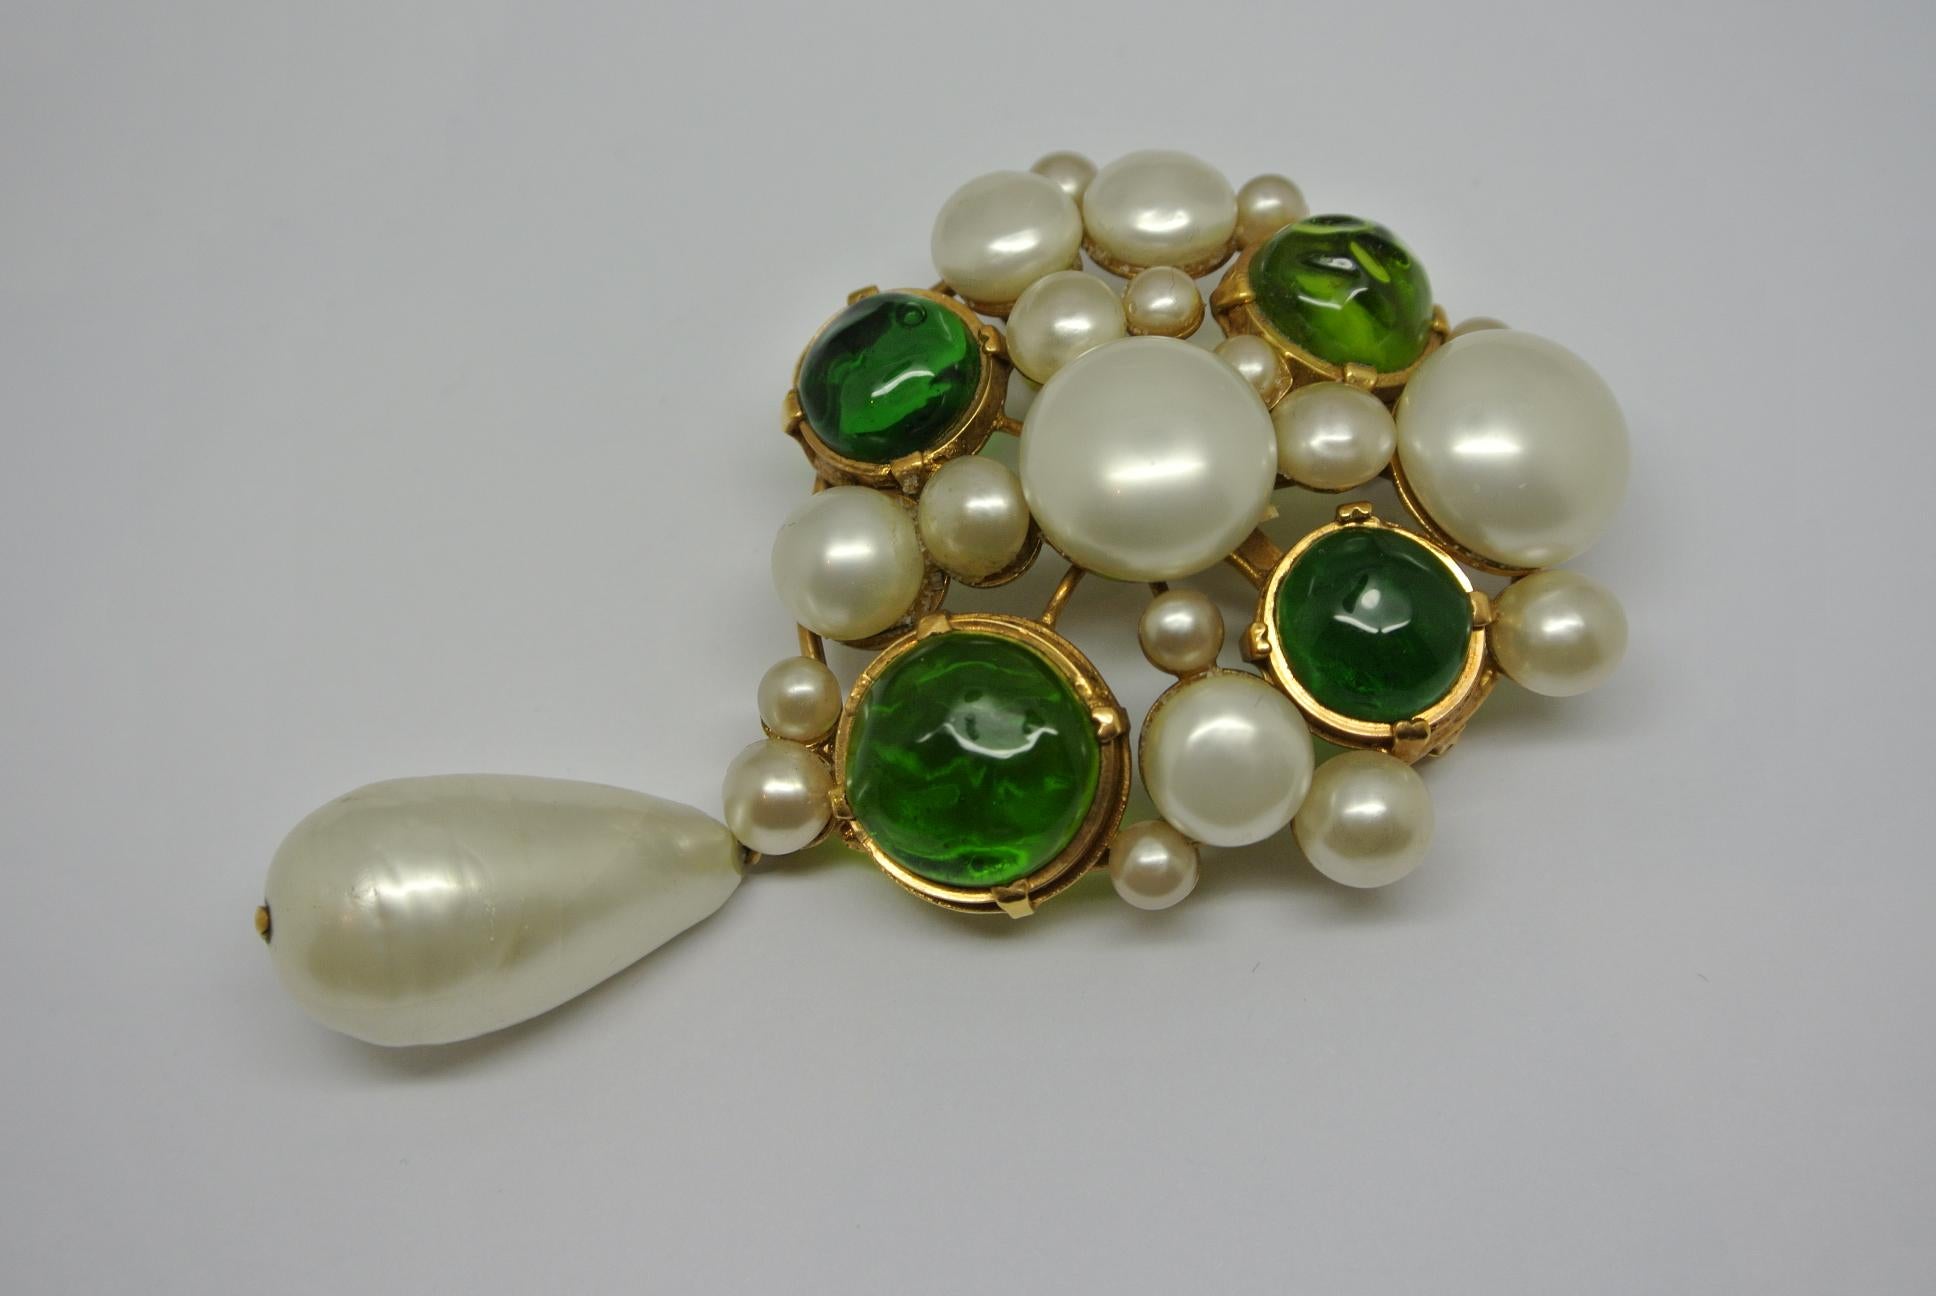 Contemporary Vintage Chanel Green Gripoix Poured Glass Faux Pearl Drop Brooch Pendant For Sale